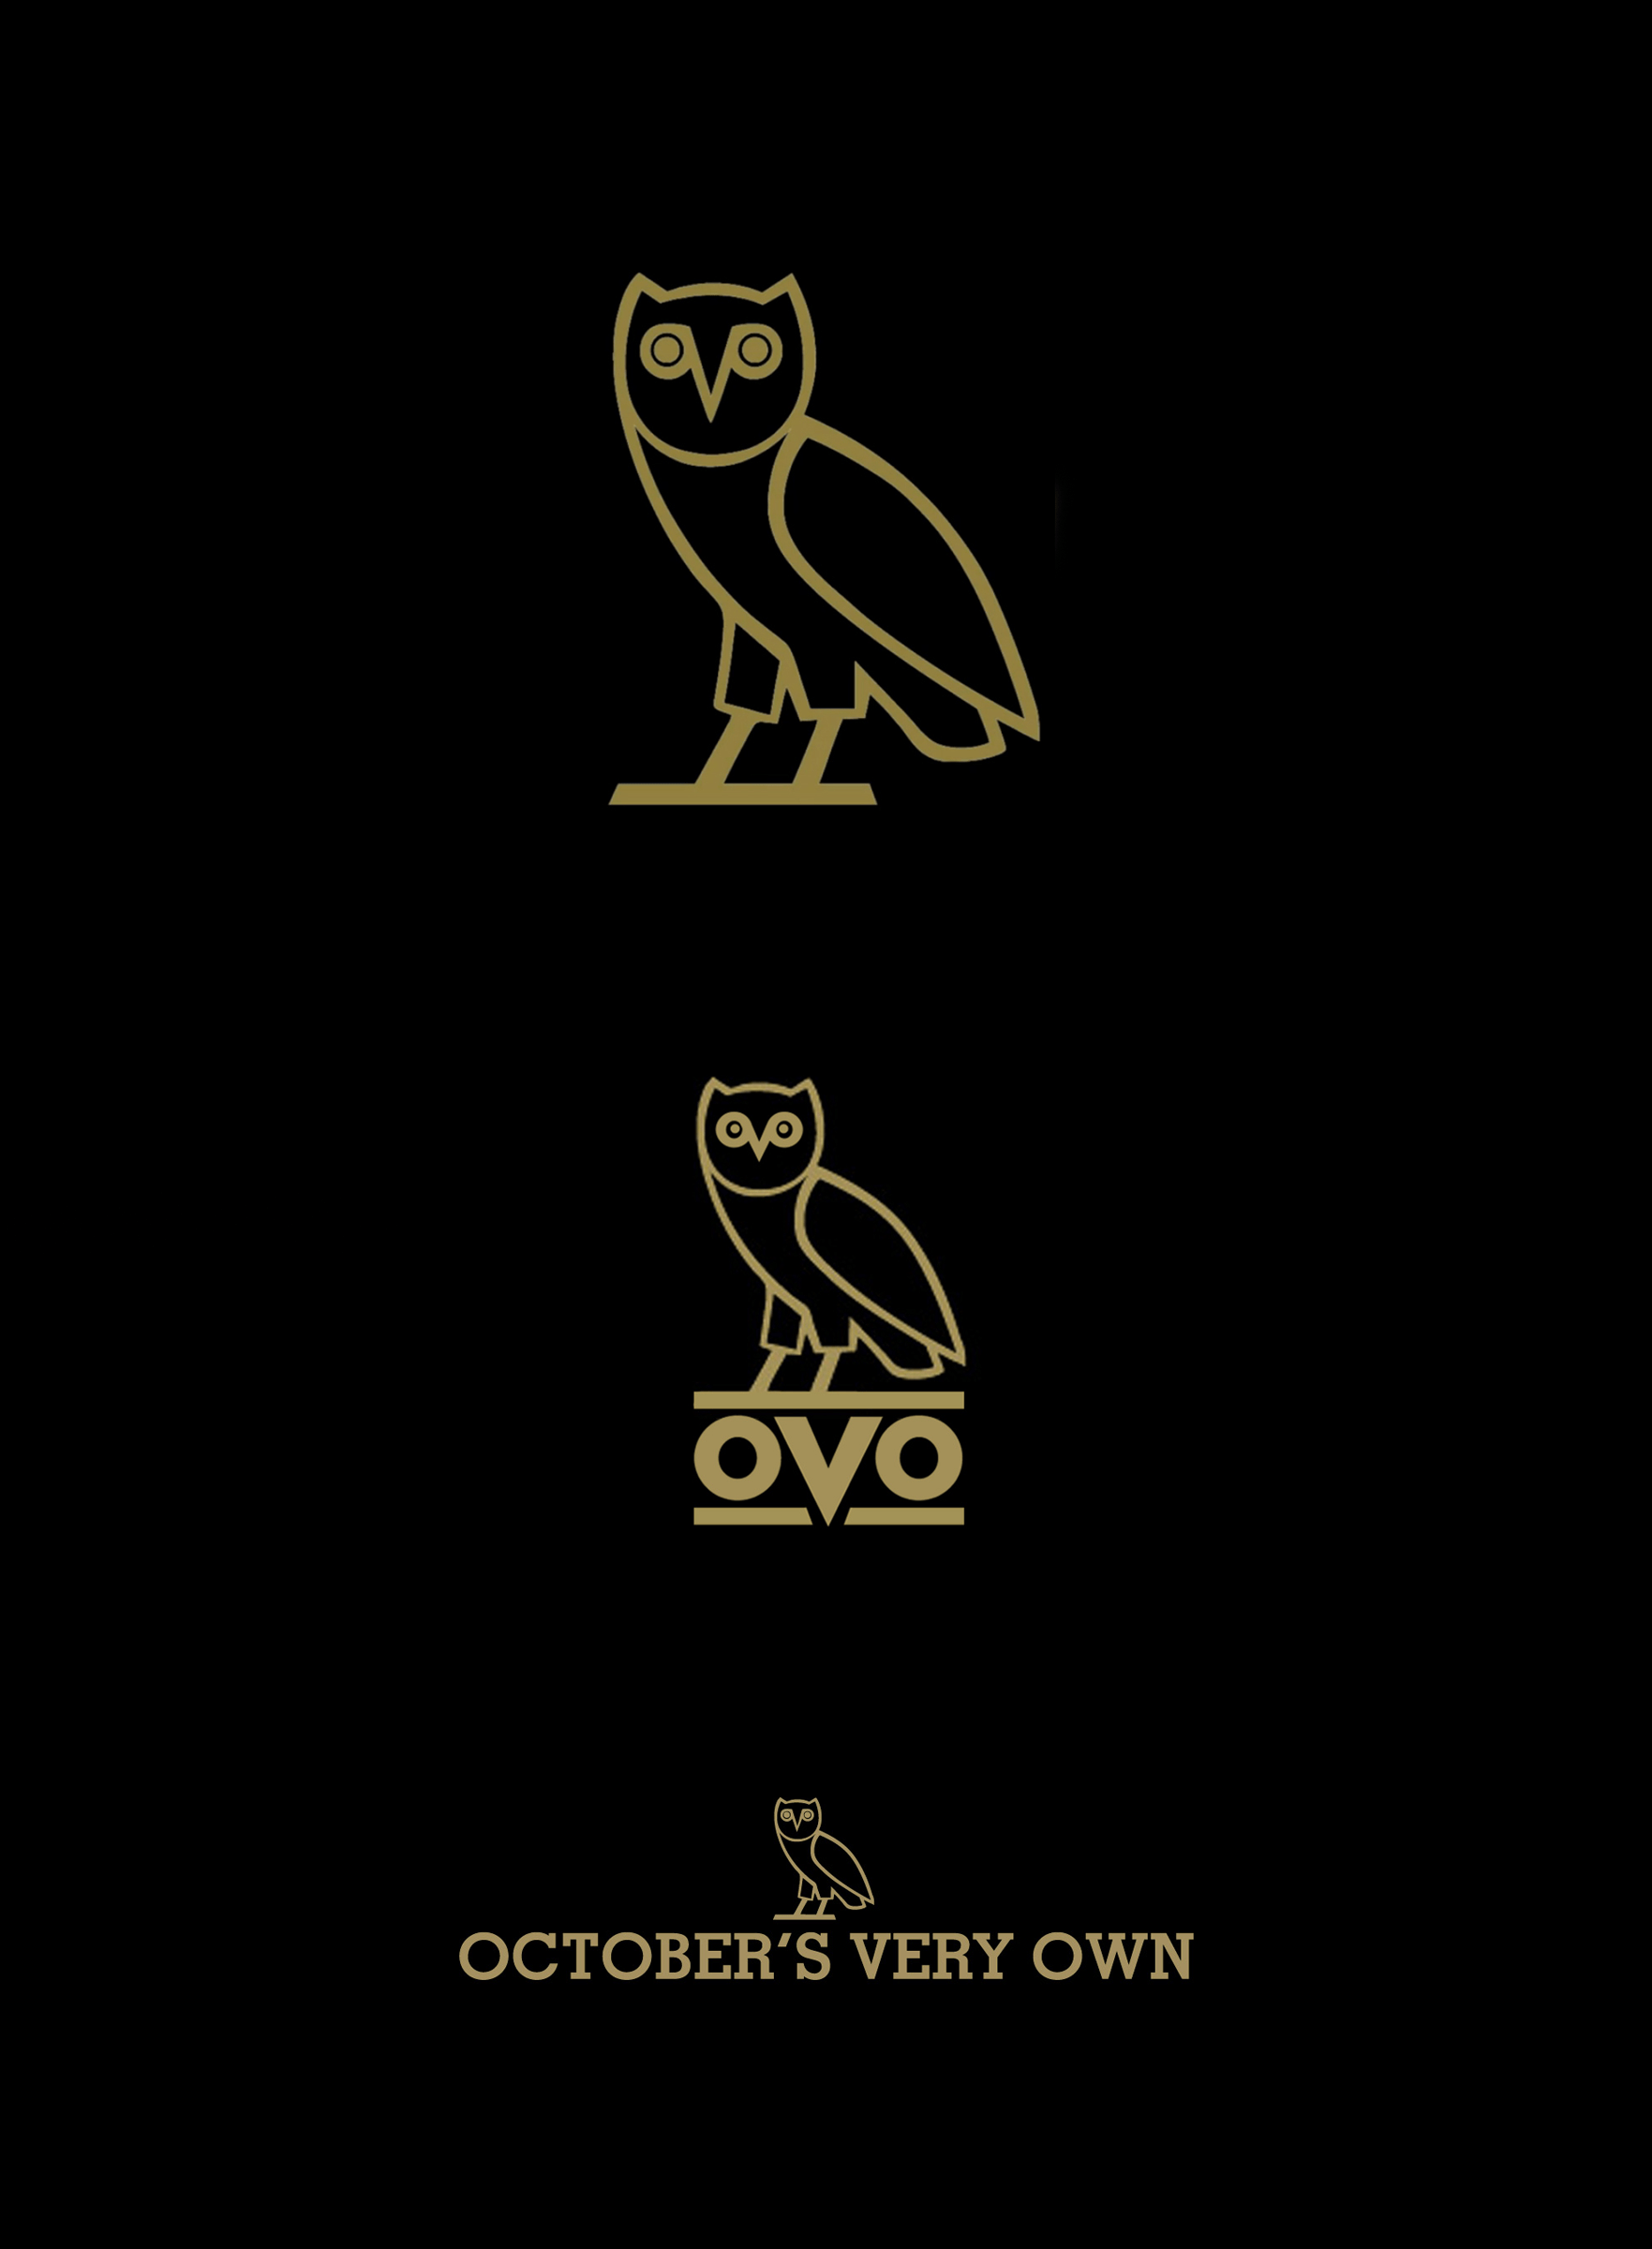 Ovo Logo - OVO logo and wordmark for Drake's made in Canada clothing line